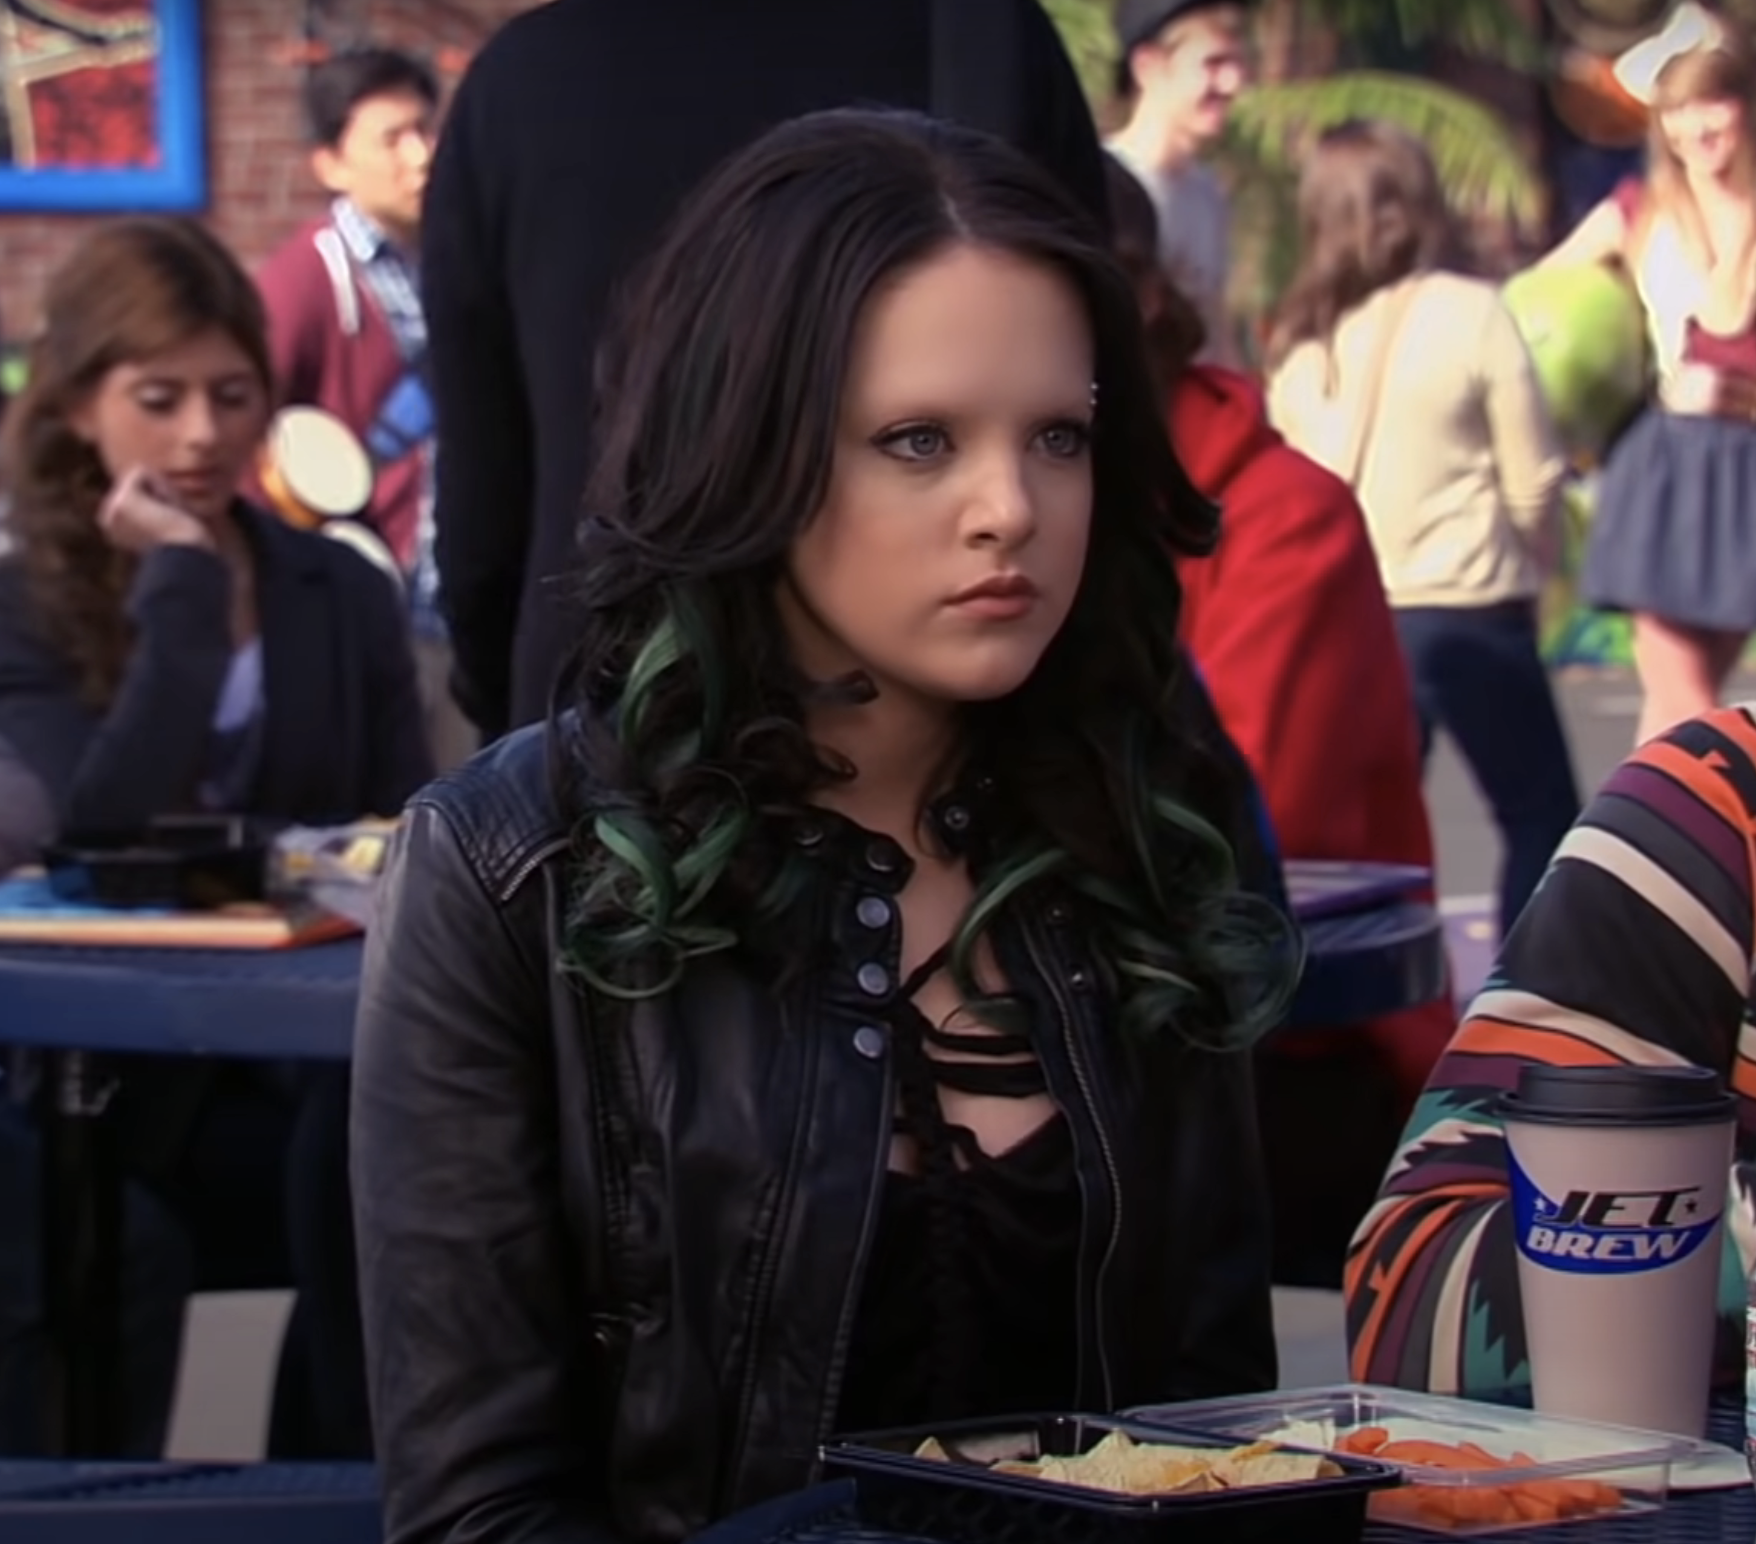 goth chick at school lunch